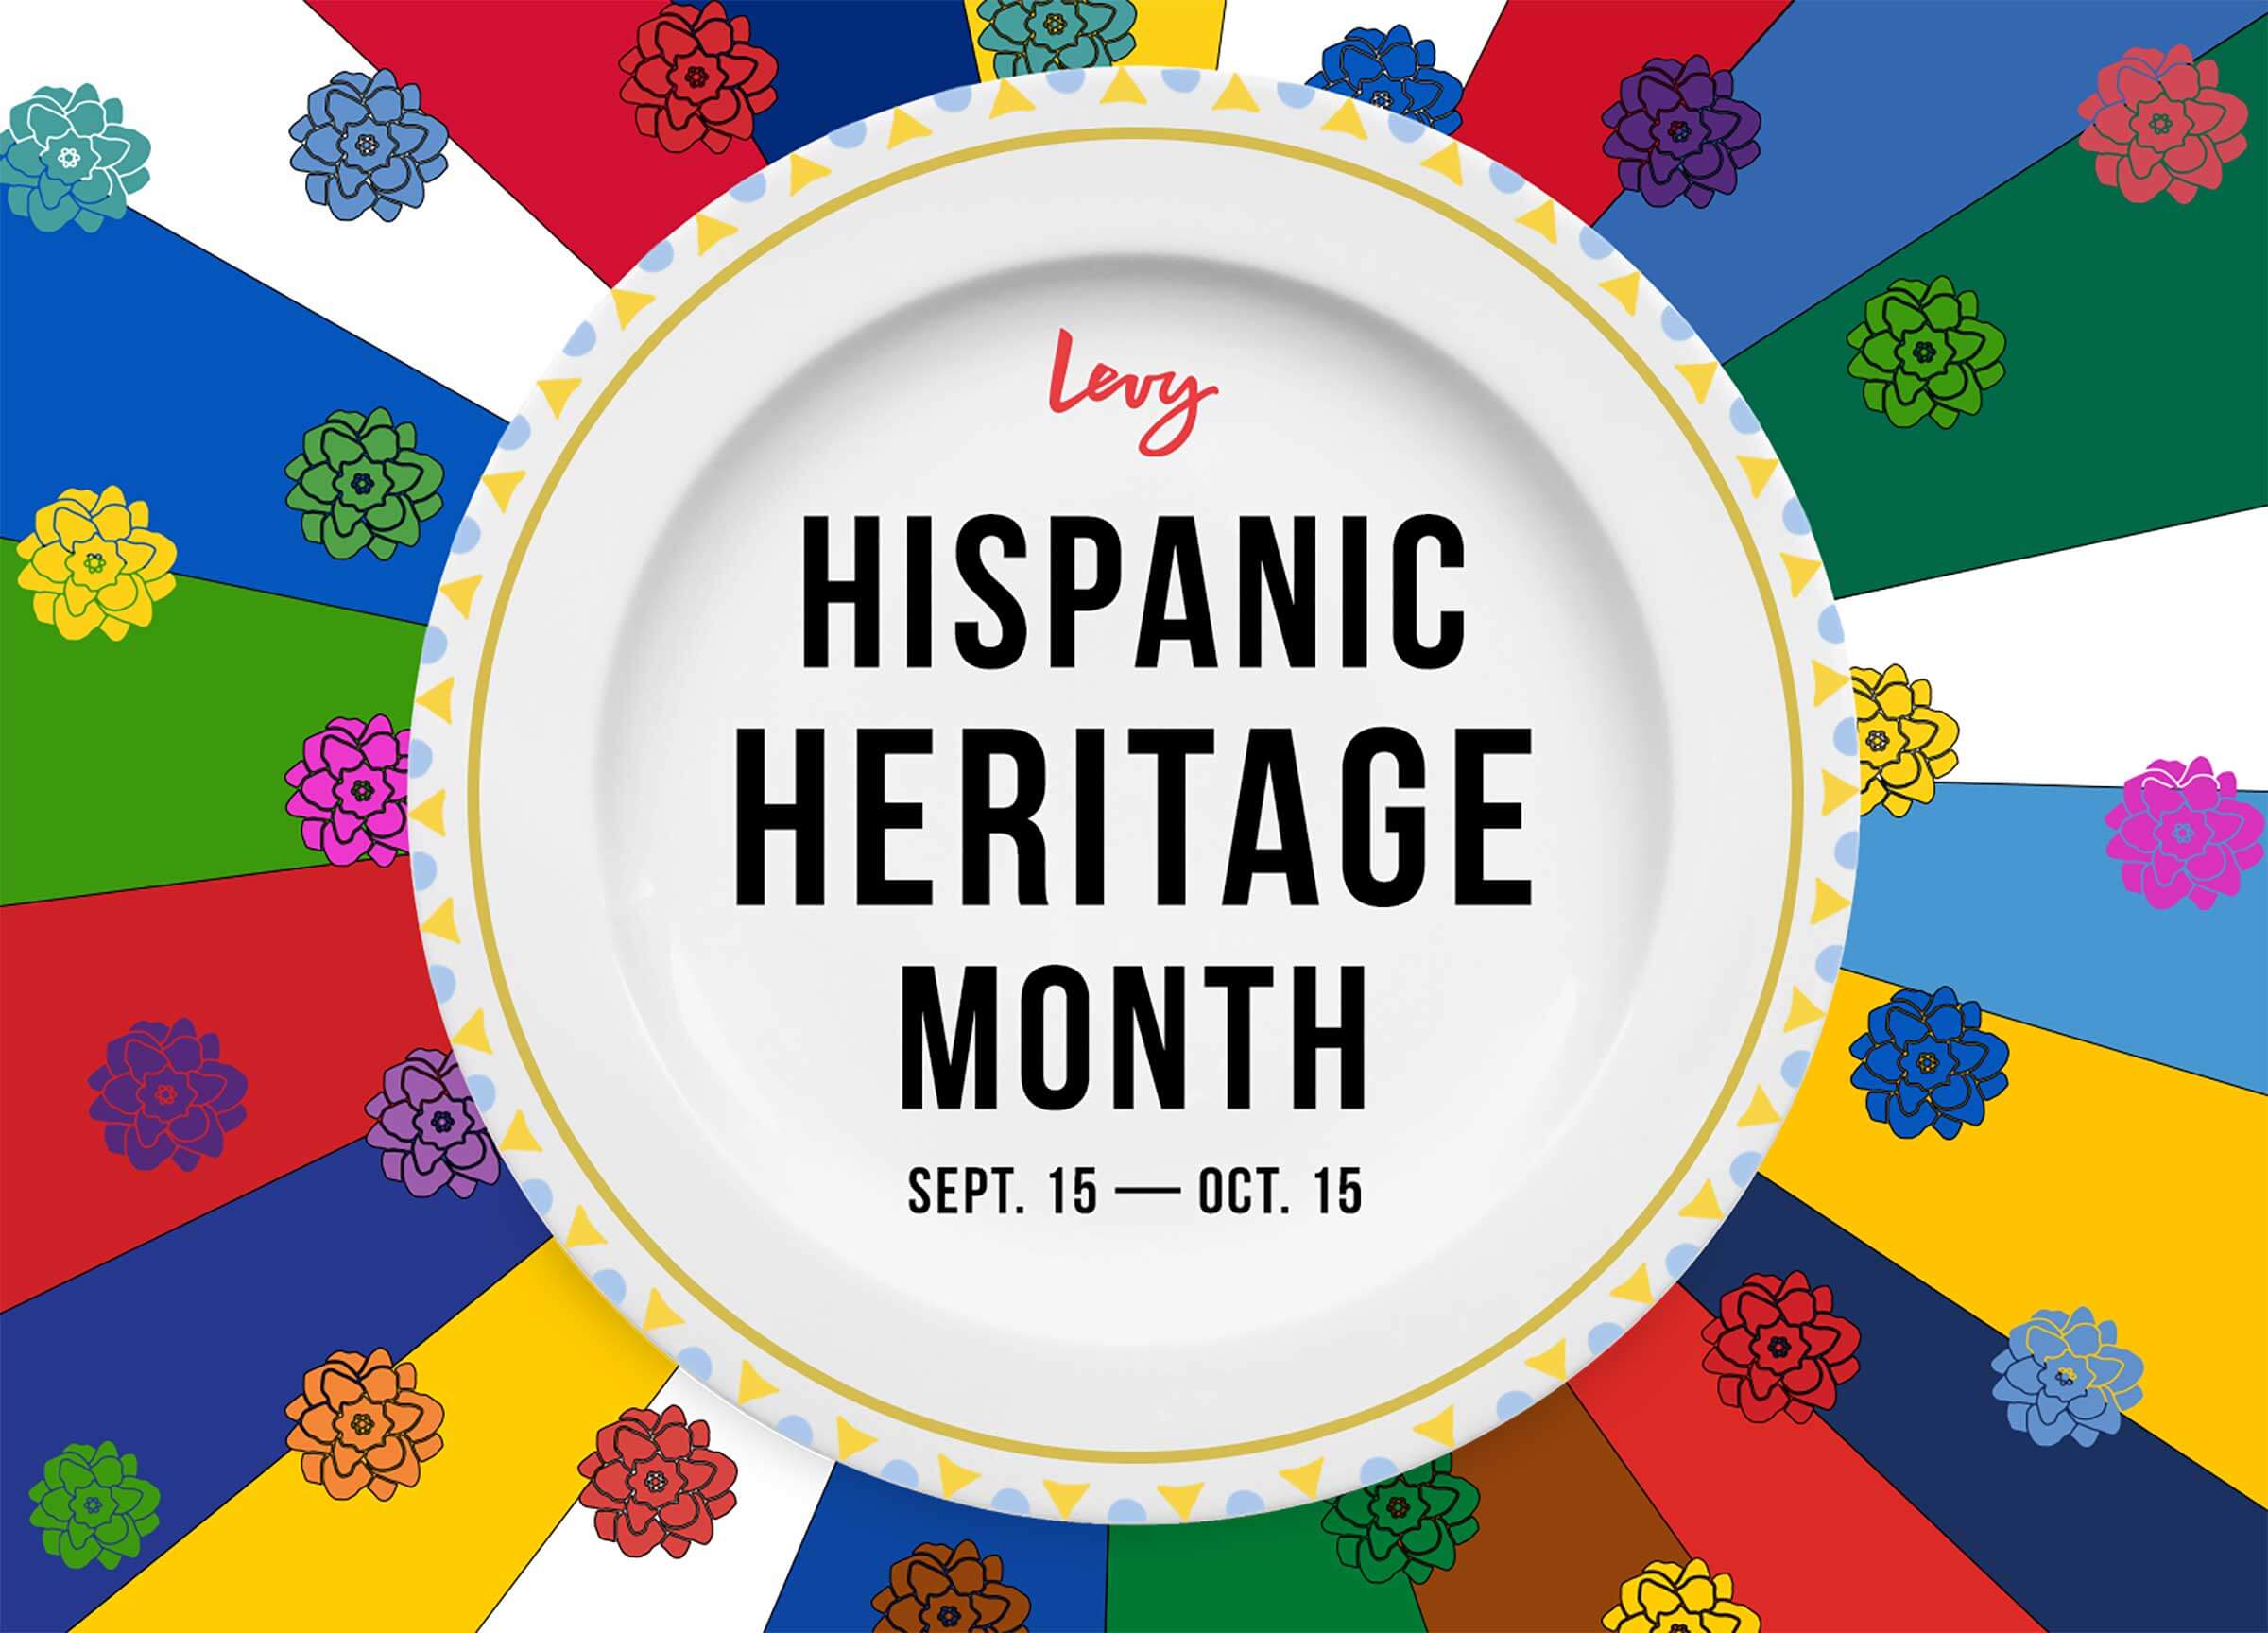 Hispanic Heritage Month: Levy Team Members Share Expressions of Food and Culture